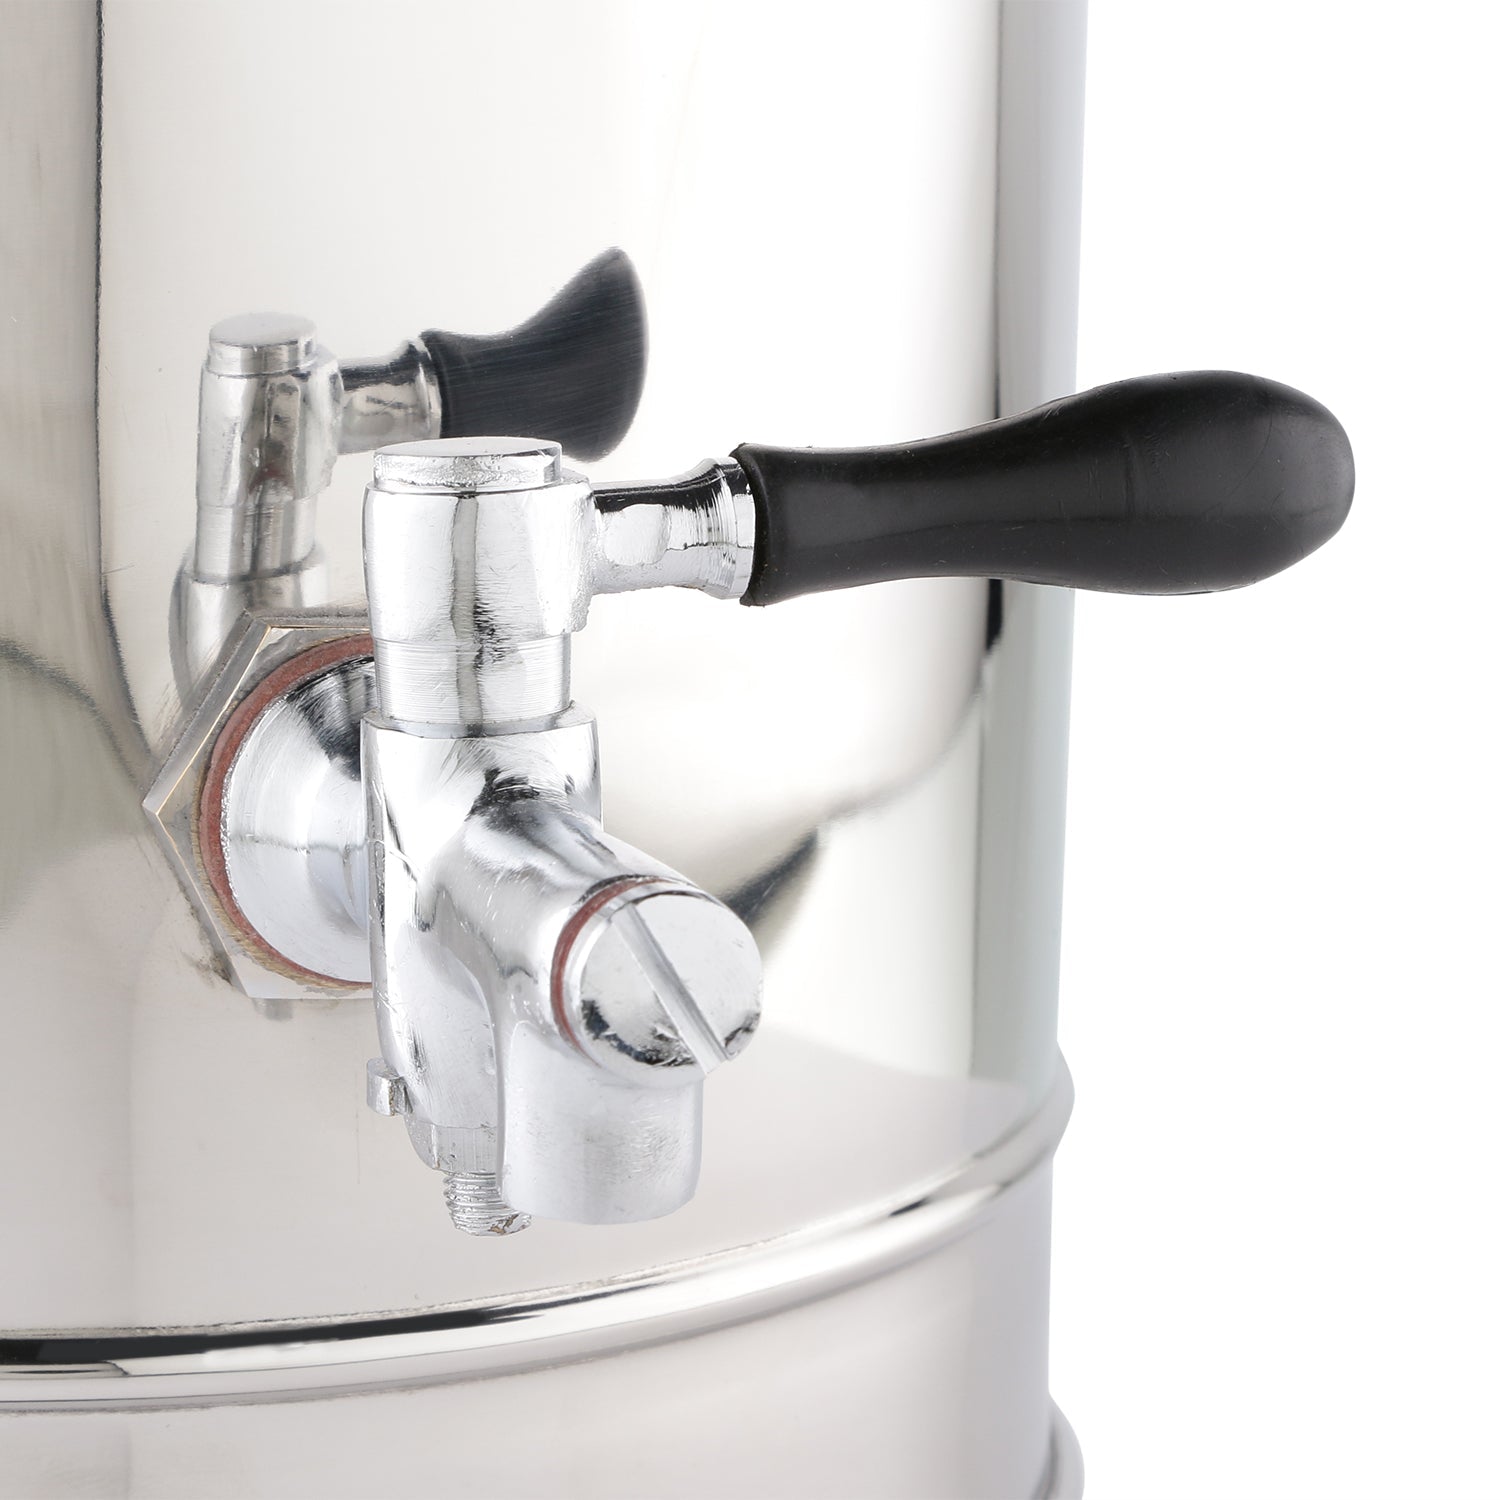 NanoNine T-Urn 2.5 L Double Wall Insulated Stainless Steel Tea Pot.